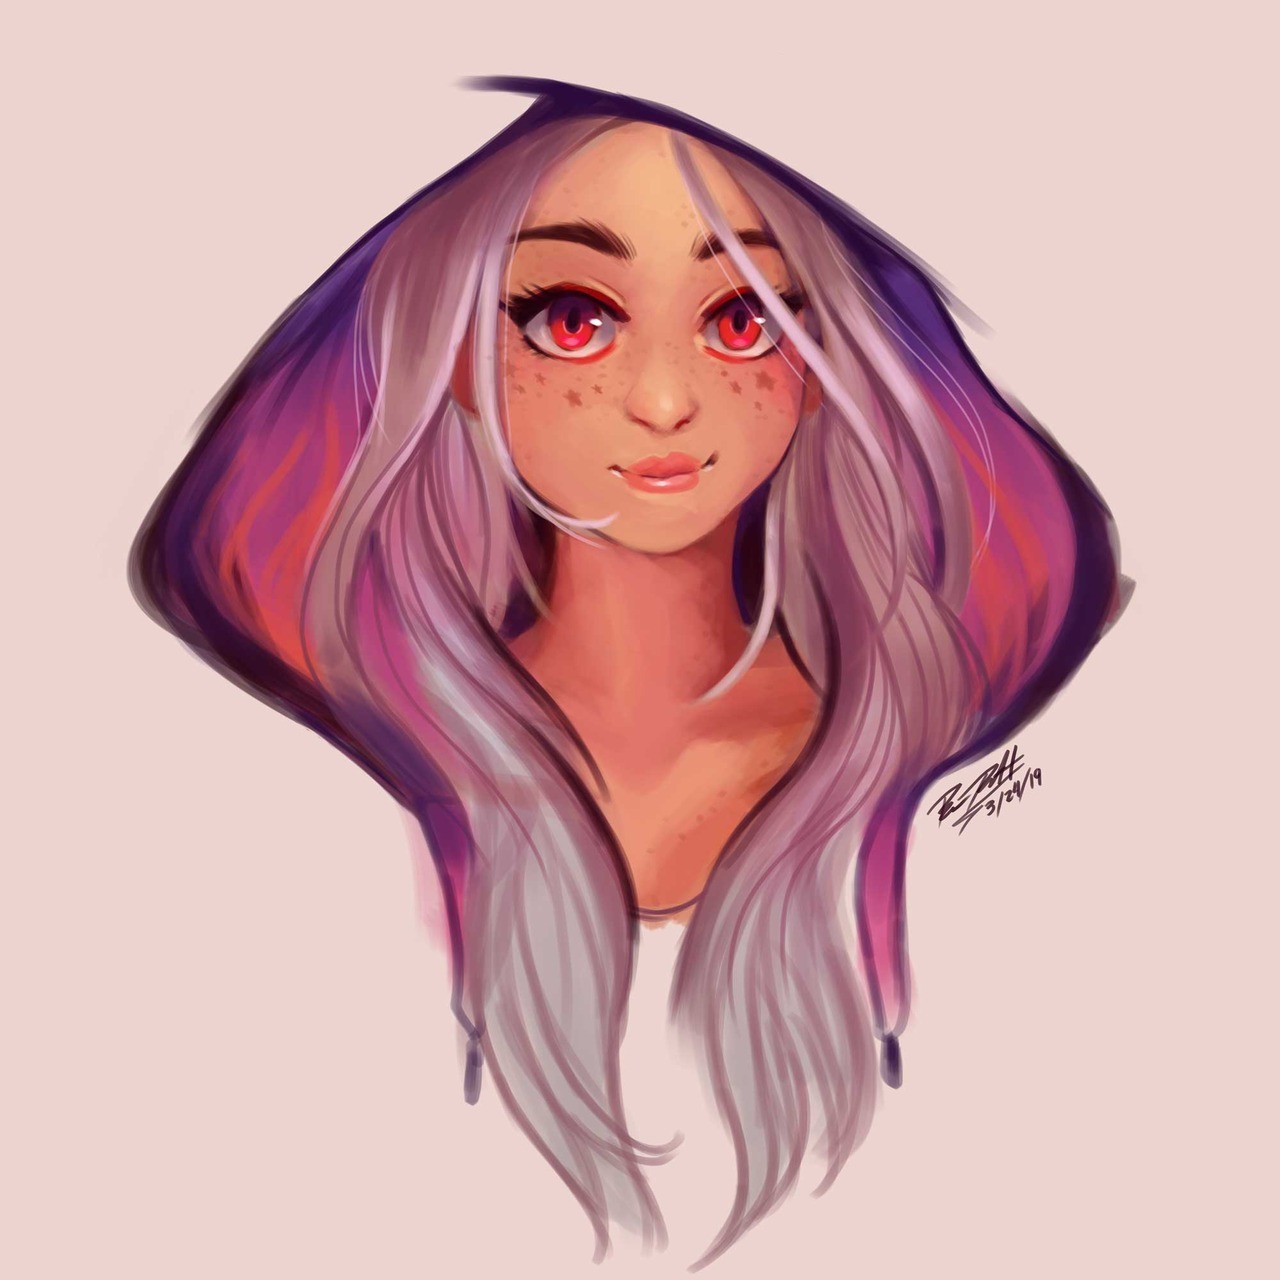 Art & Stuff — Draw This In Your Style Challenge: Cyarine A “Draw...